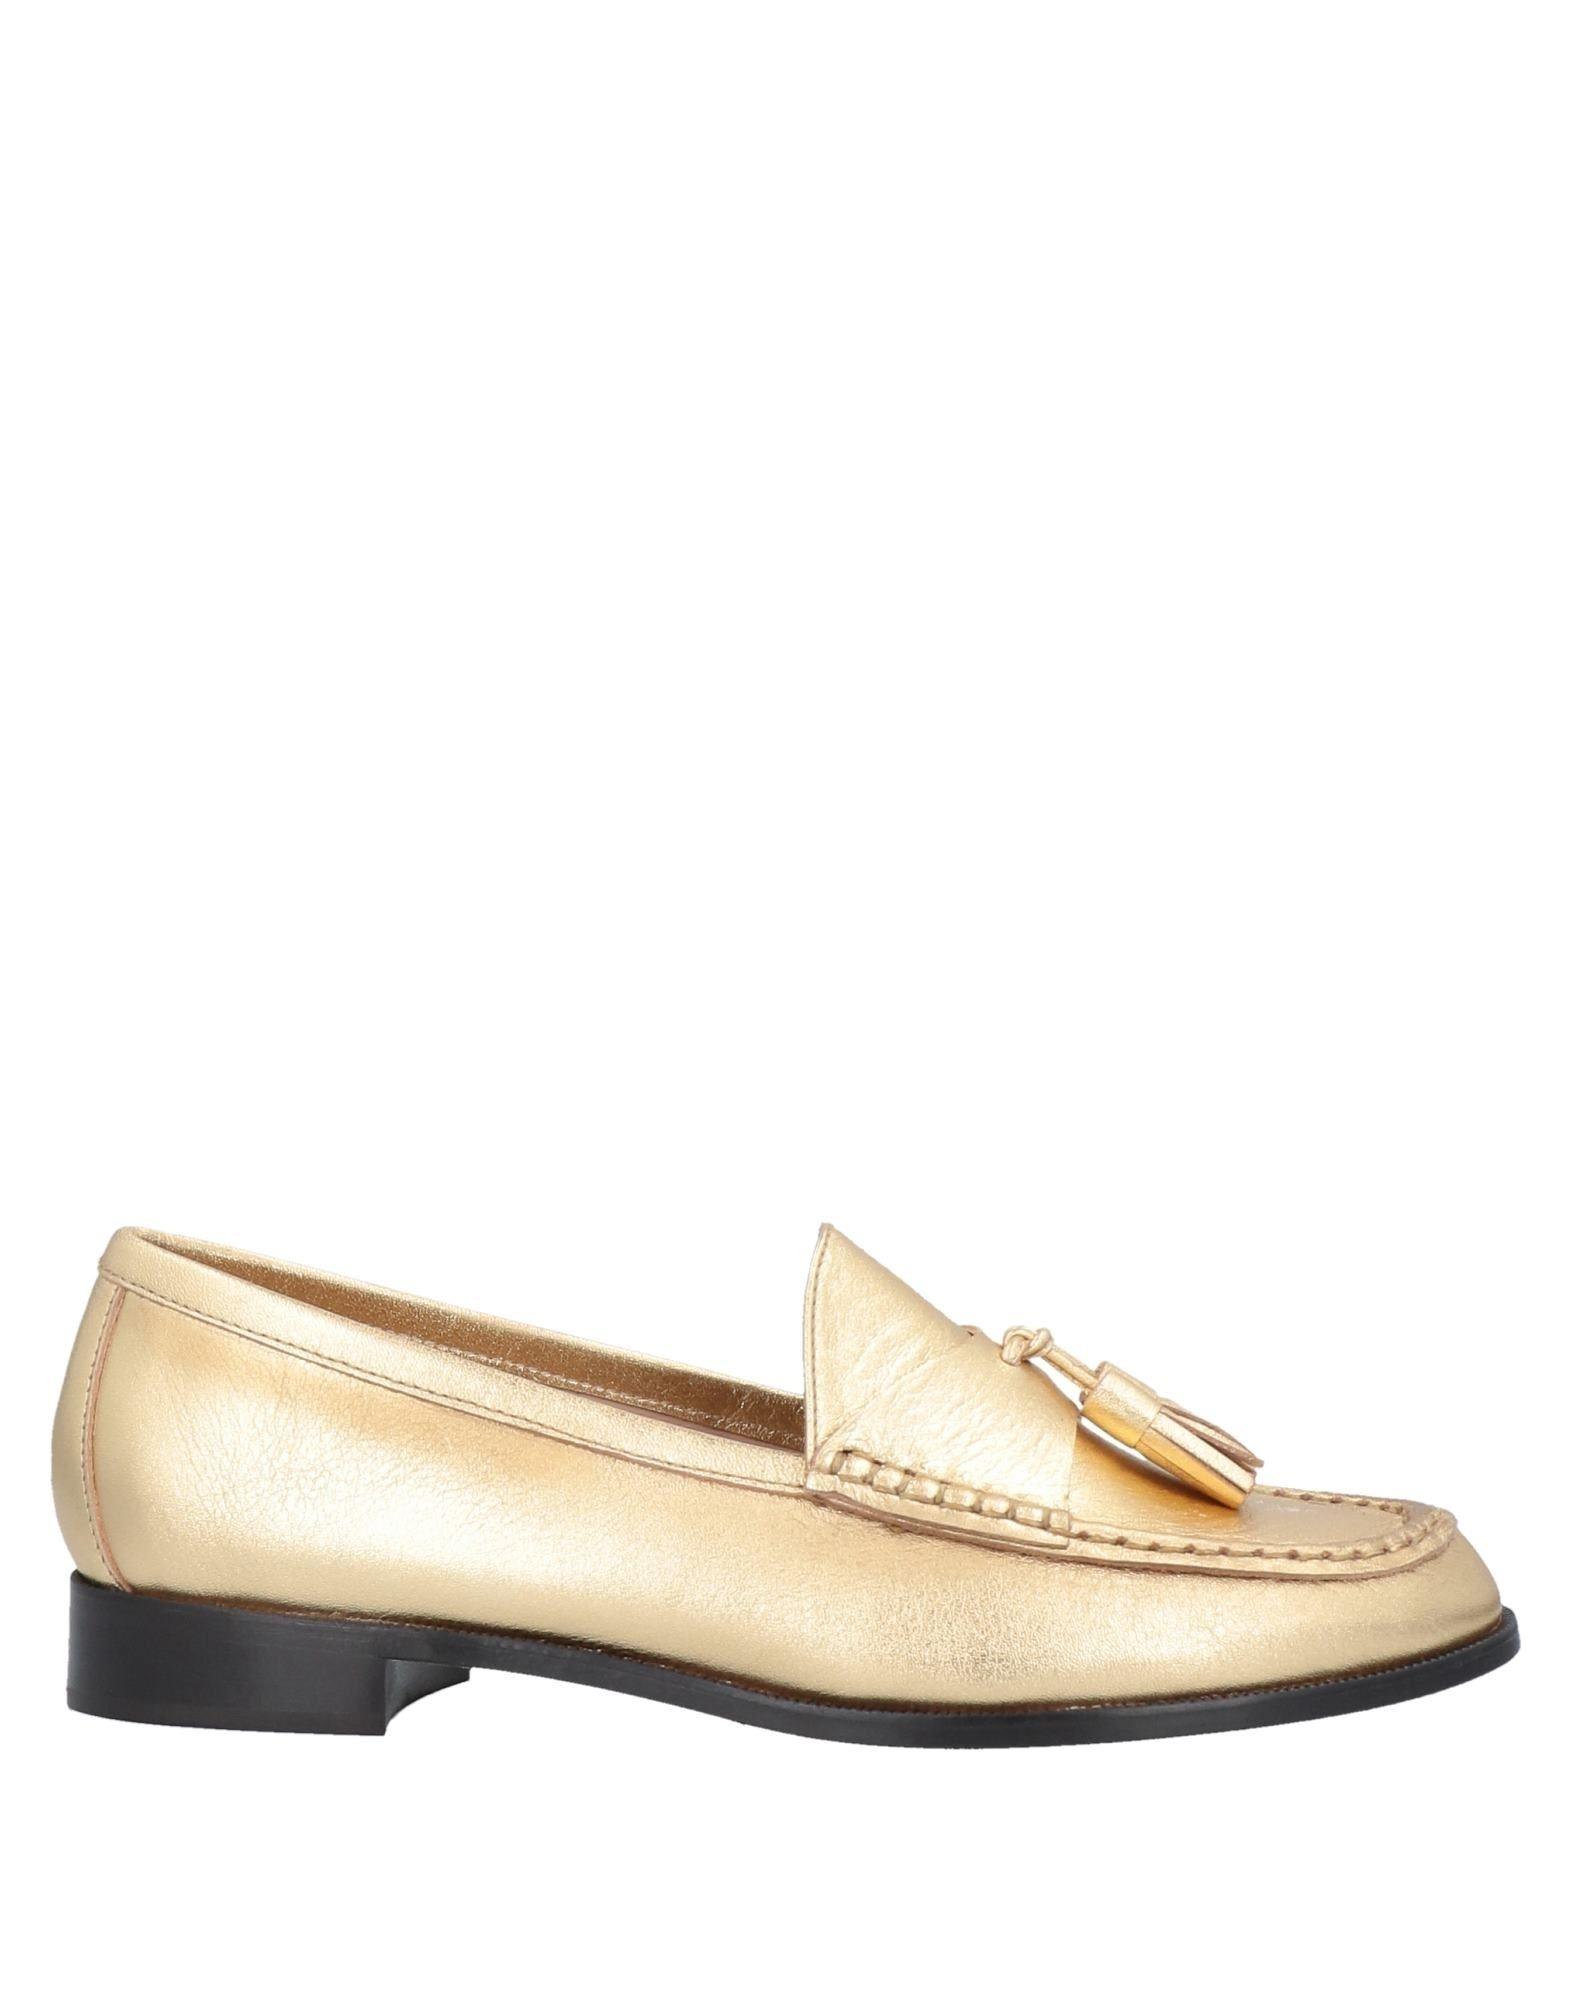 Sandro Leather Loafer in Gold (Metallic) | Lyst